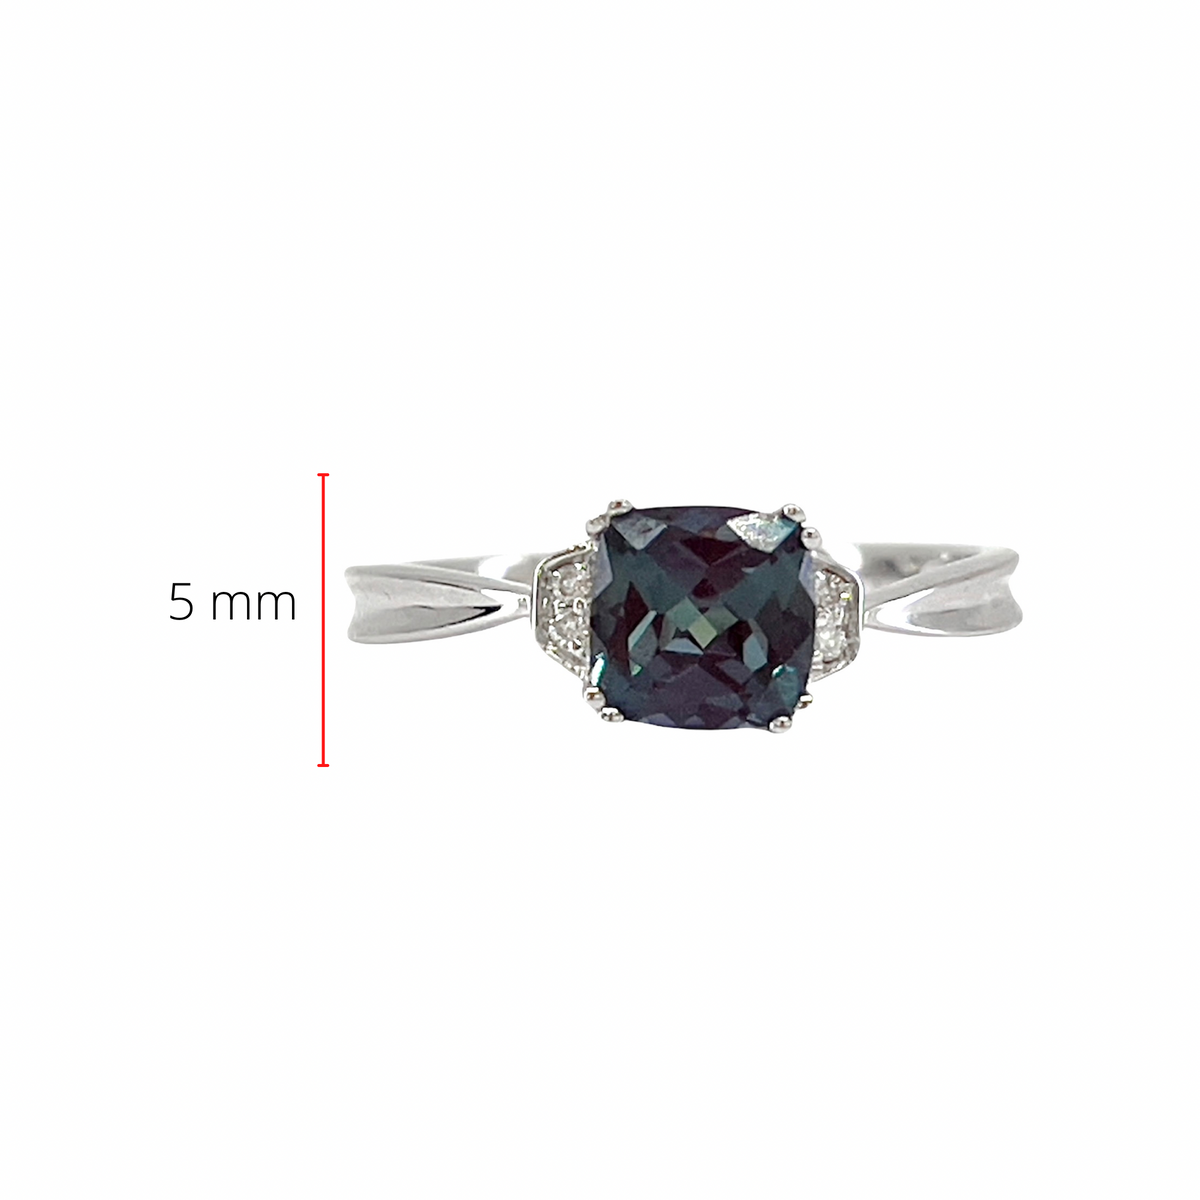 10K White Gold 1.00cttw Created Alexandrite and 0.02cttw Diamond Ring, size 7